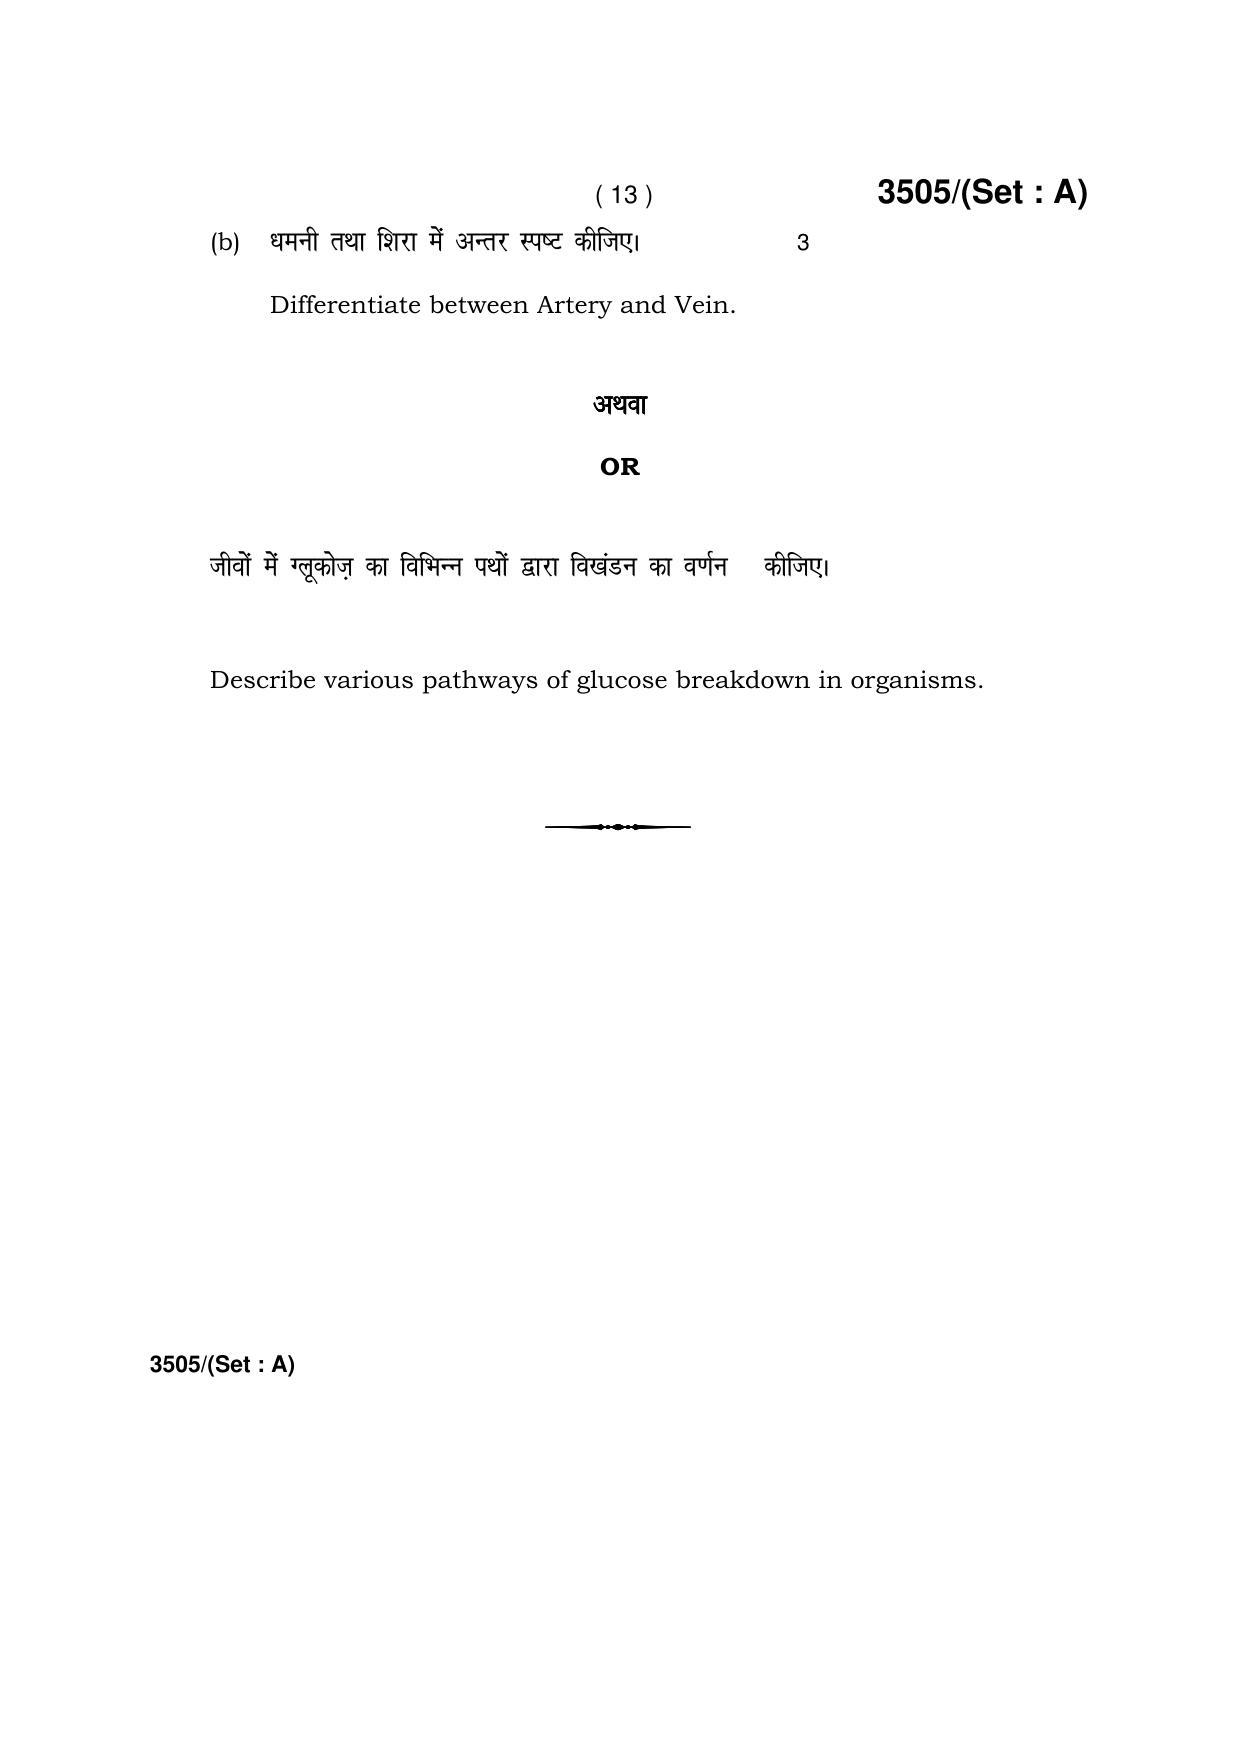 Haryana Board HBSE Class 10 Science -A 2018 Question Paper - Page 13